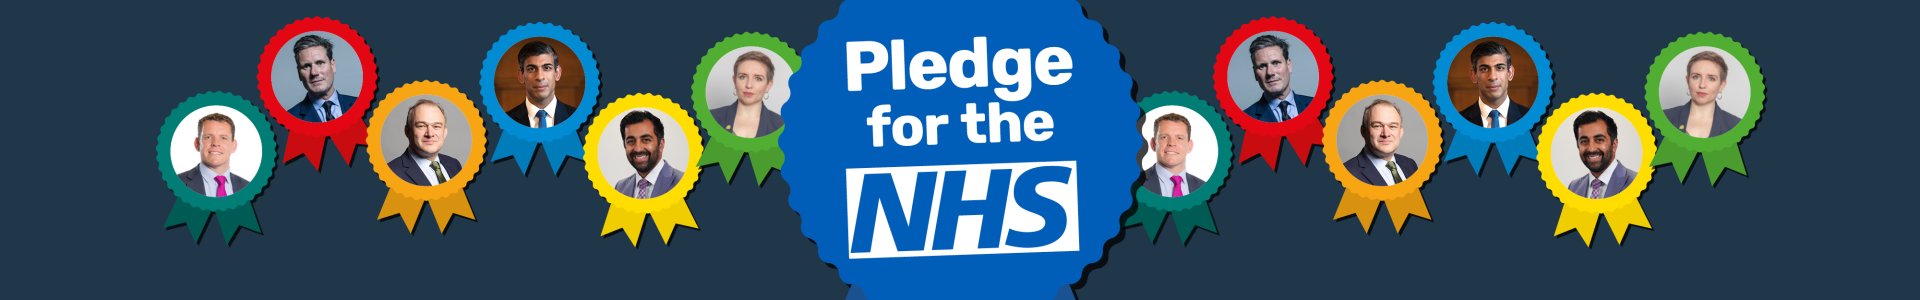 Pledge for the NHS (banner)